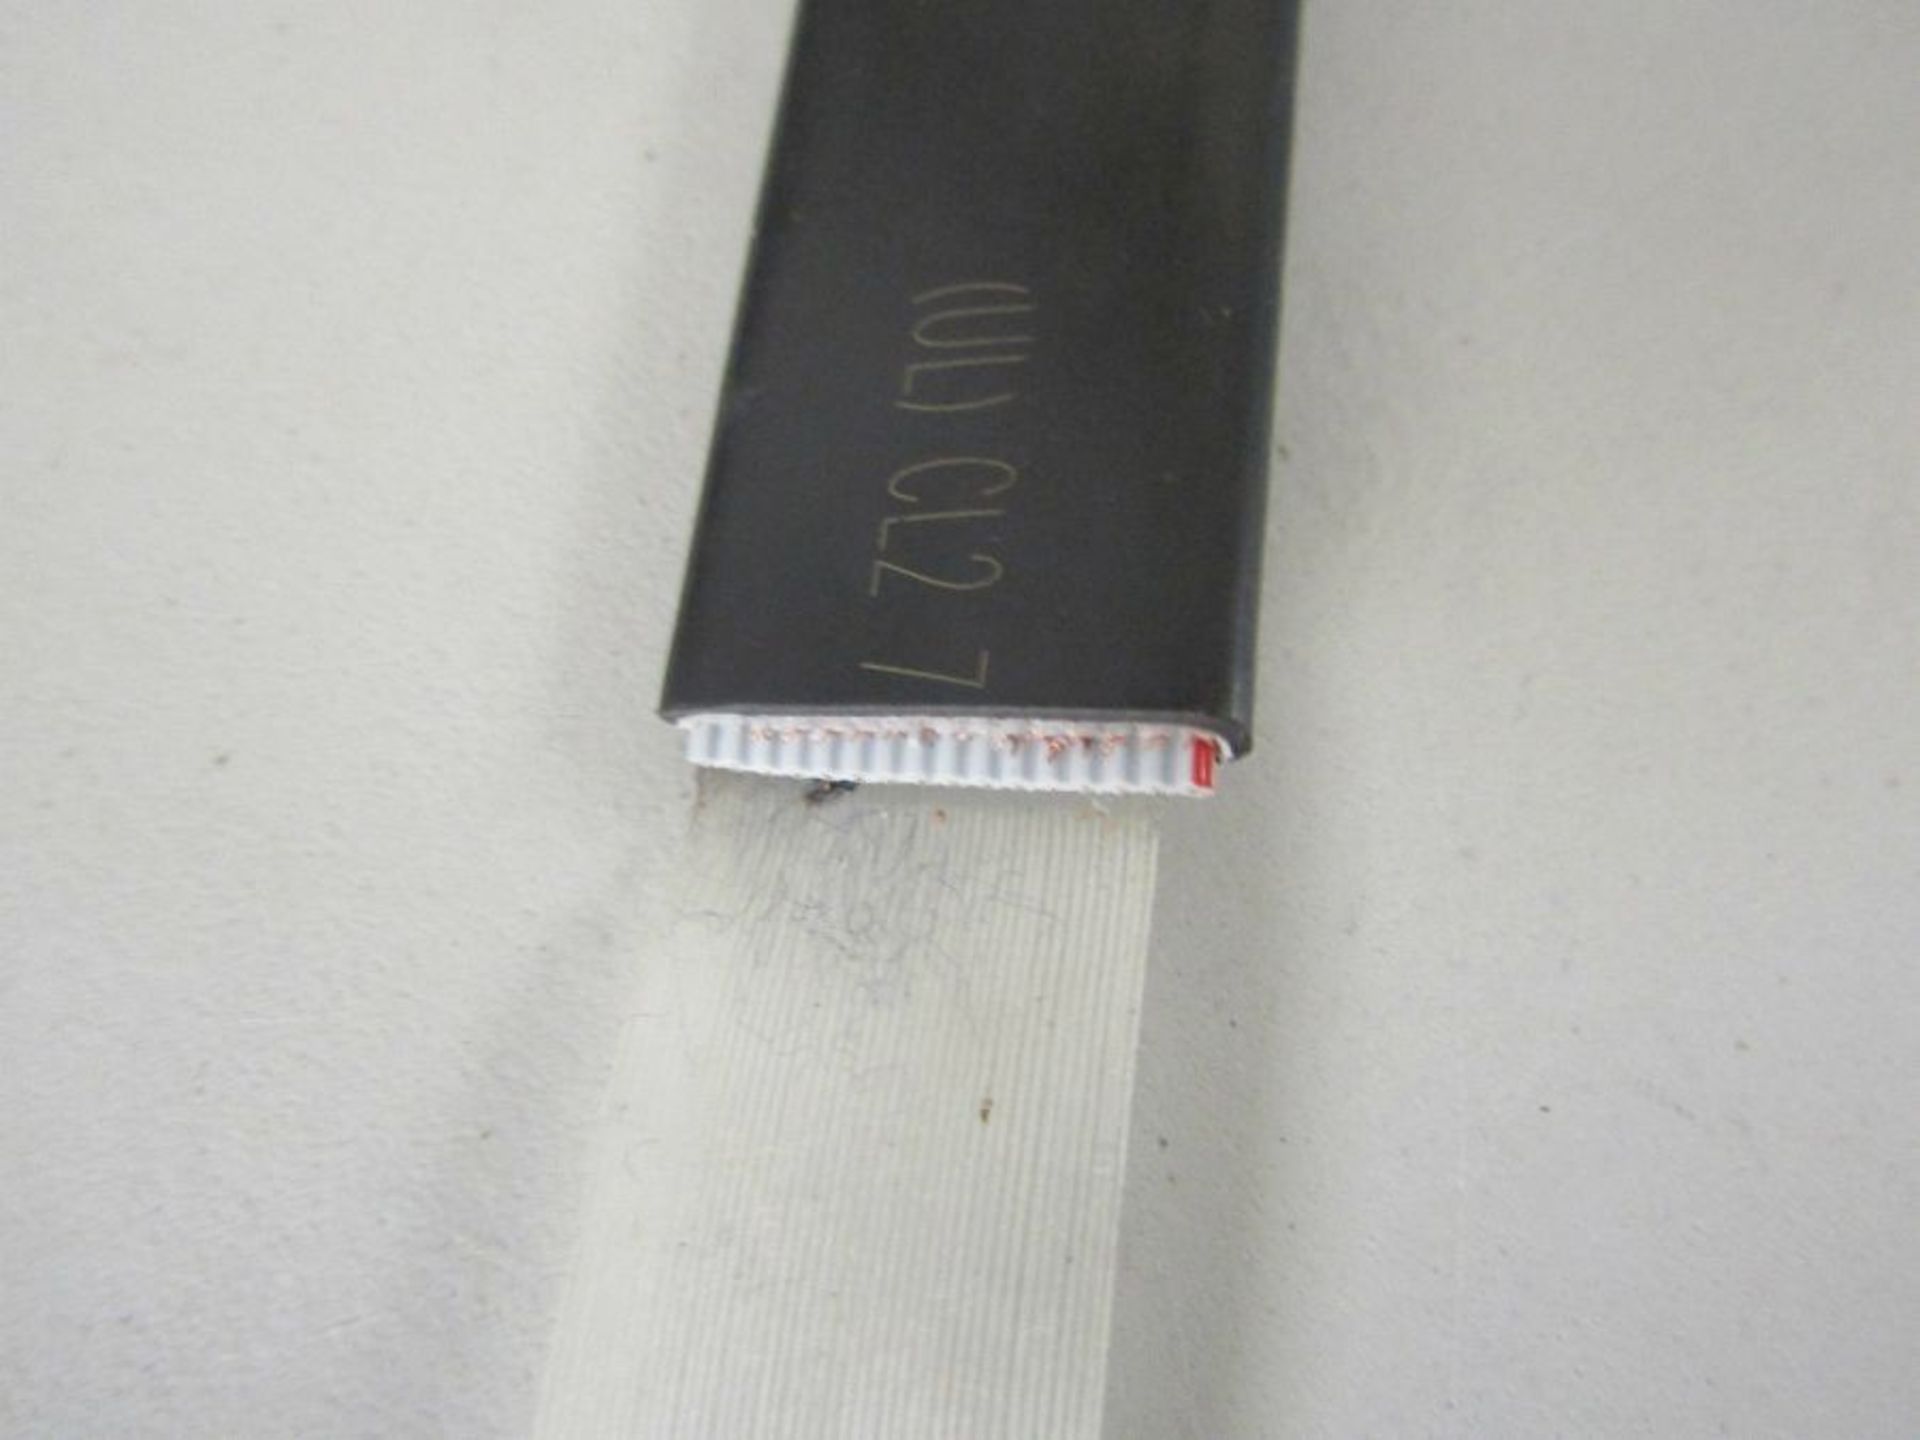 10 Reels 30m Reel of 3M 16 Way Screened Flat Ribbon Cable, 23.6mm - 351716 - 3001387049 - Image 3 of 4